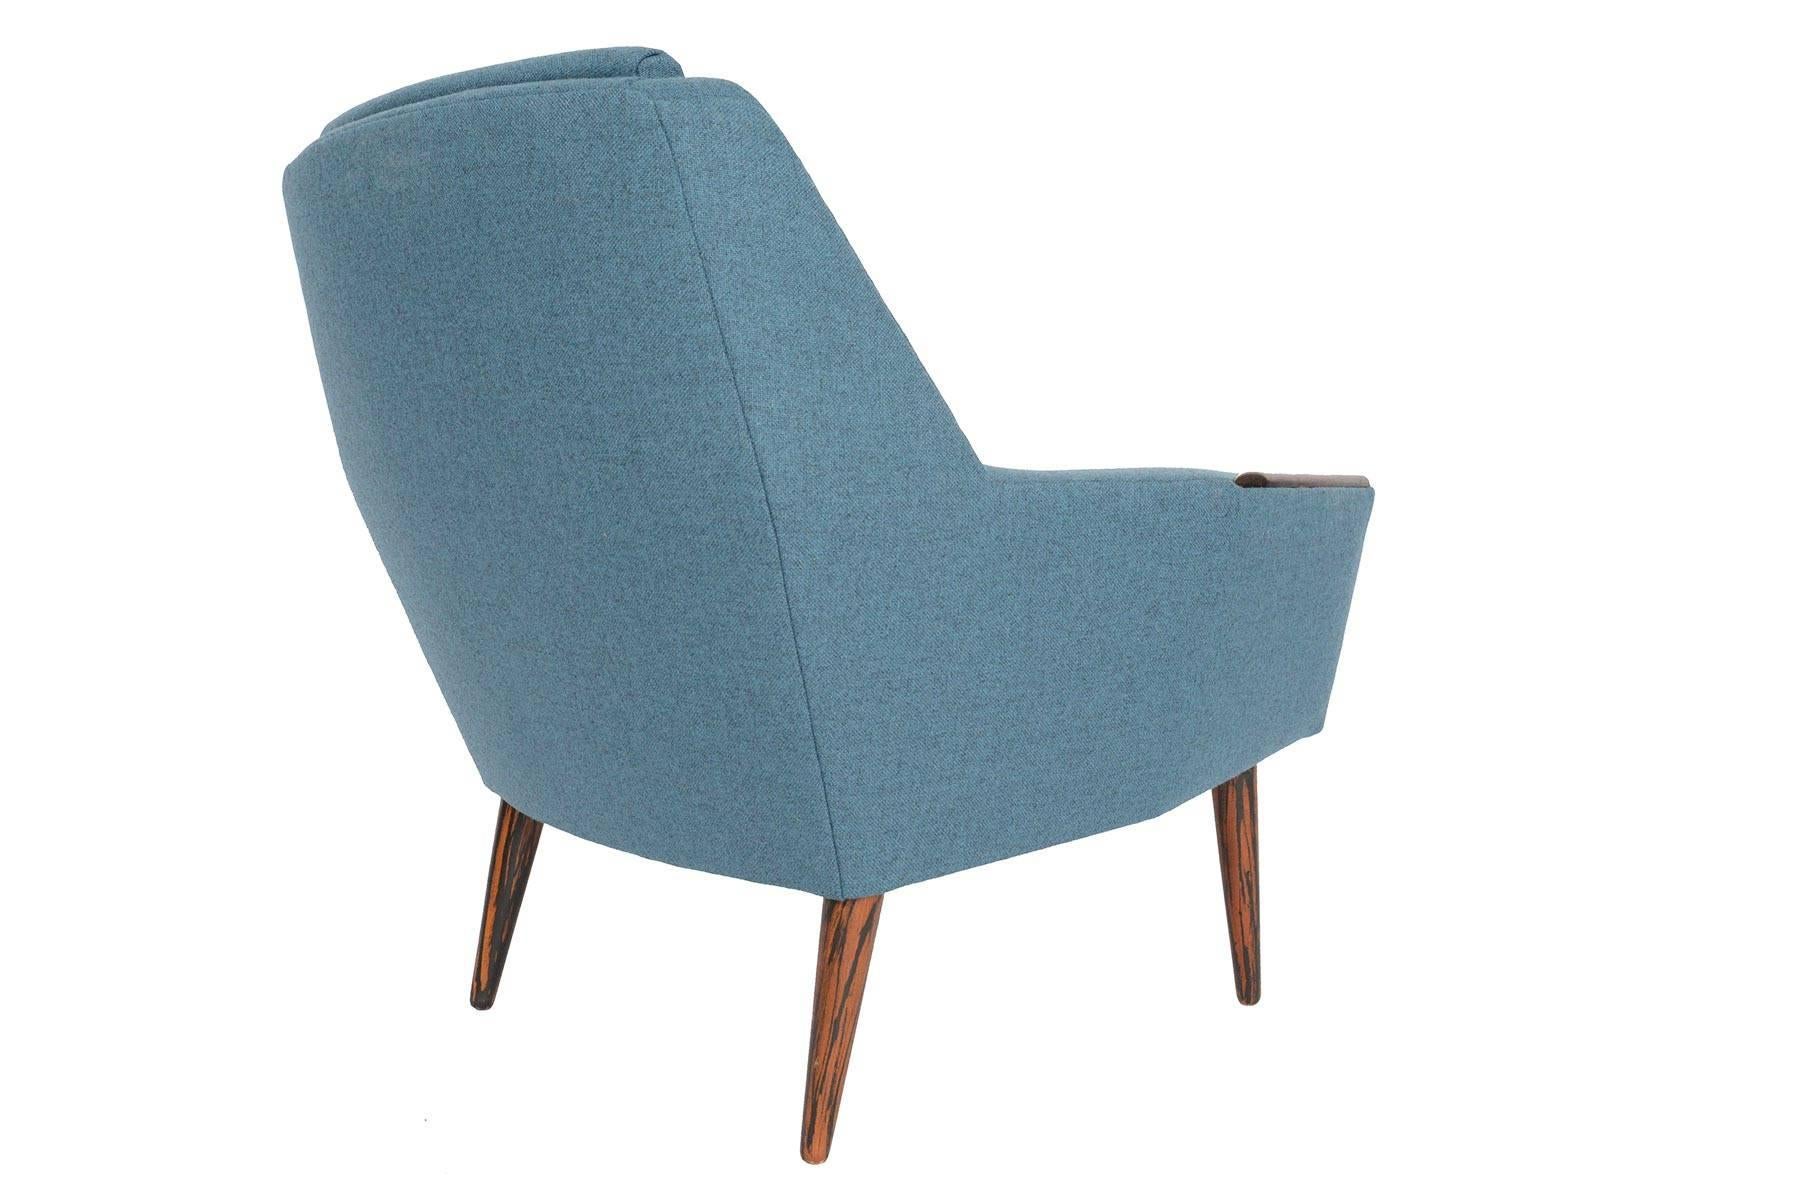 Atomic Danish Modern Midcentury Rosewood Lounge Chair in Cerulean Wool In Excellent Condition In Berkeley, CA